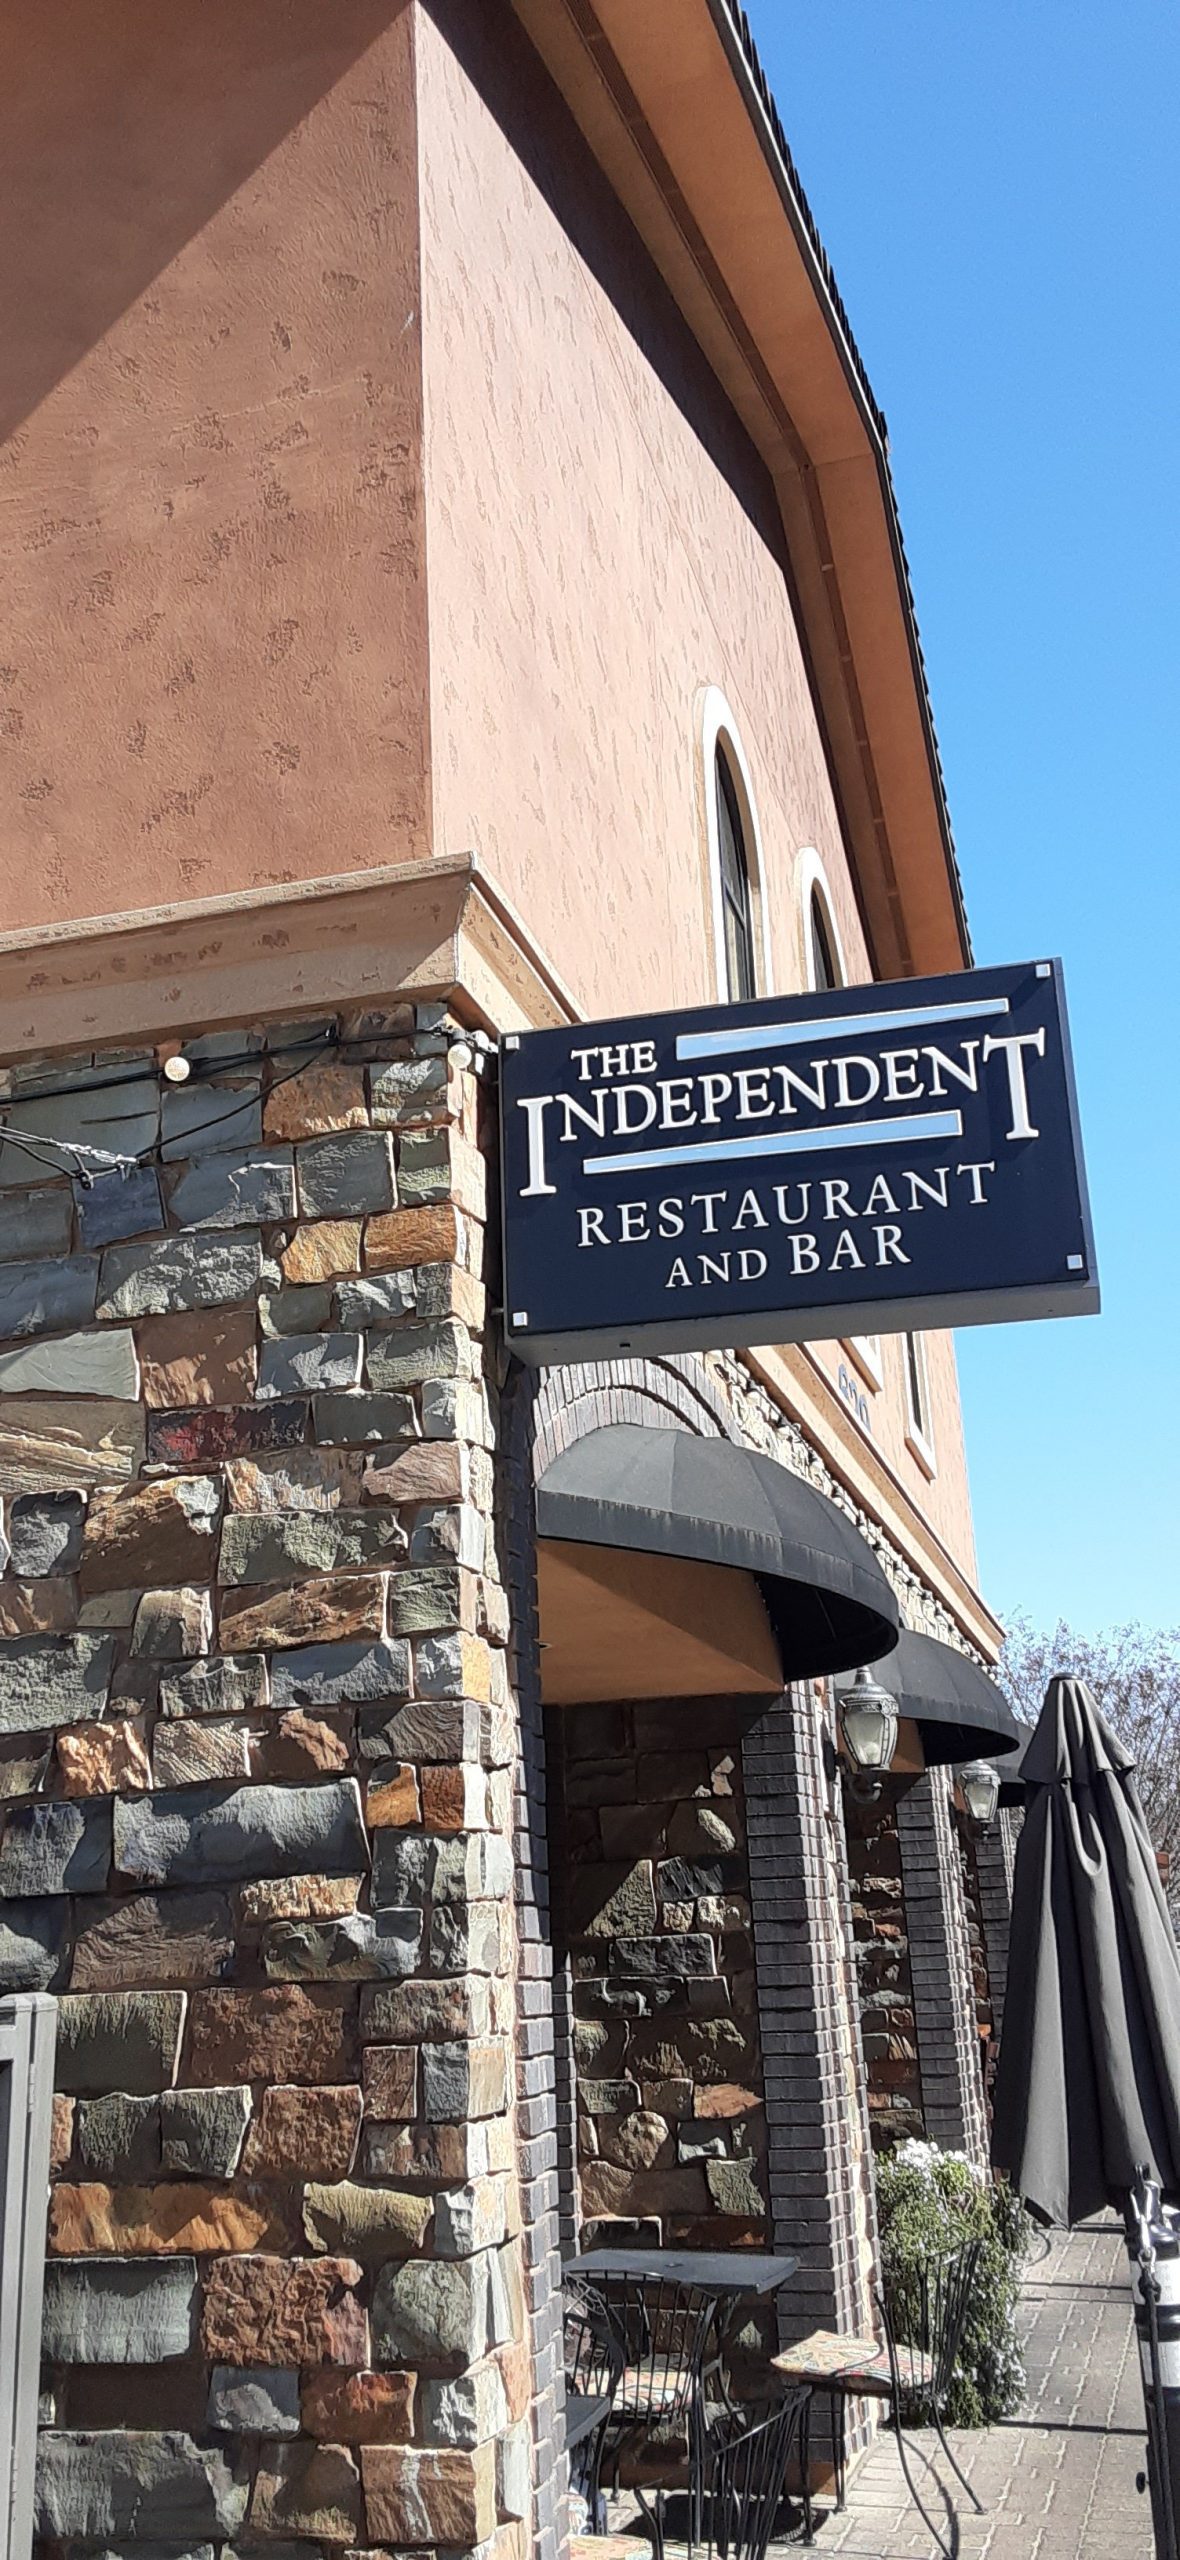 The Independent Restaurant and Bar